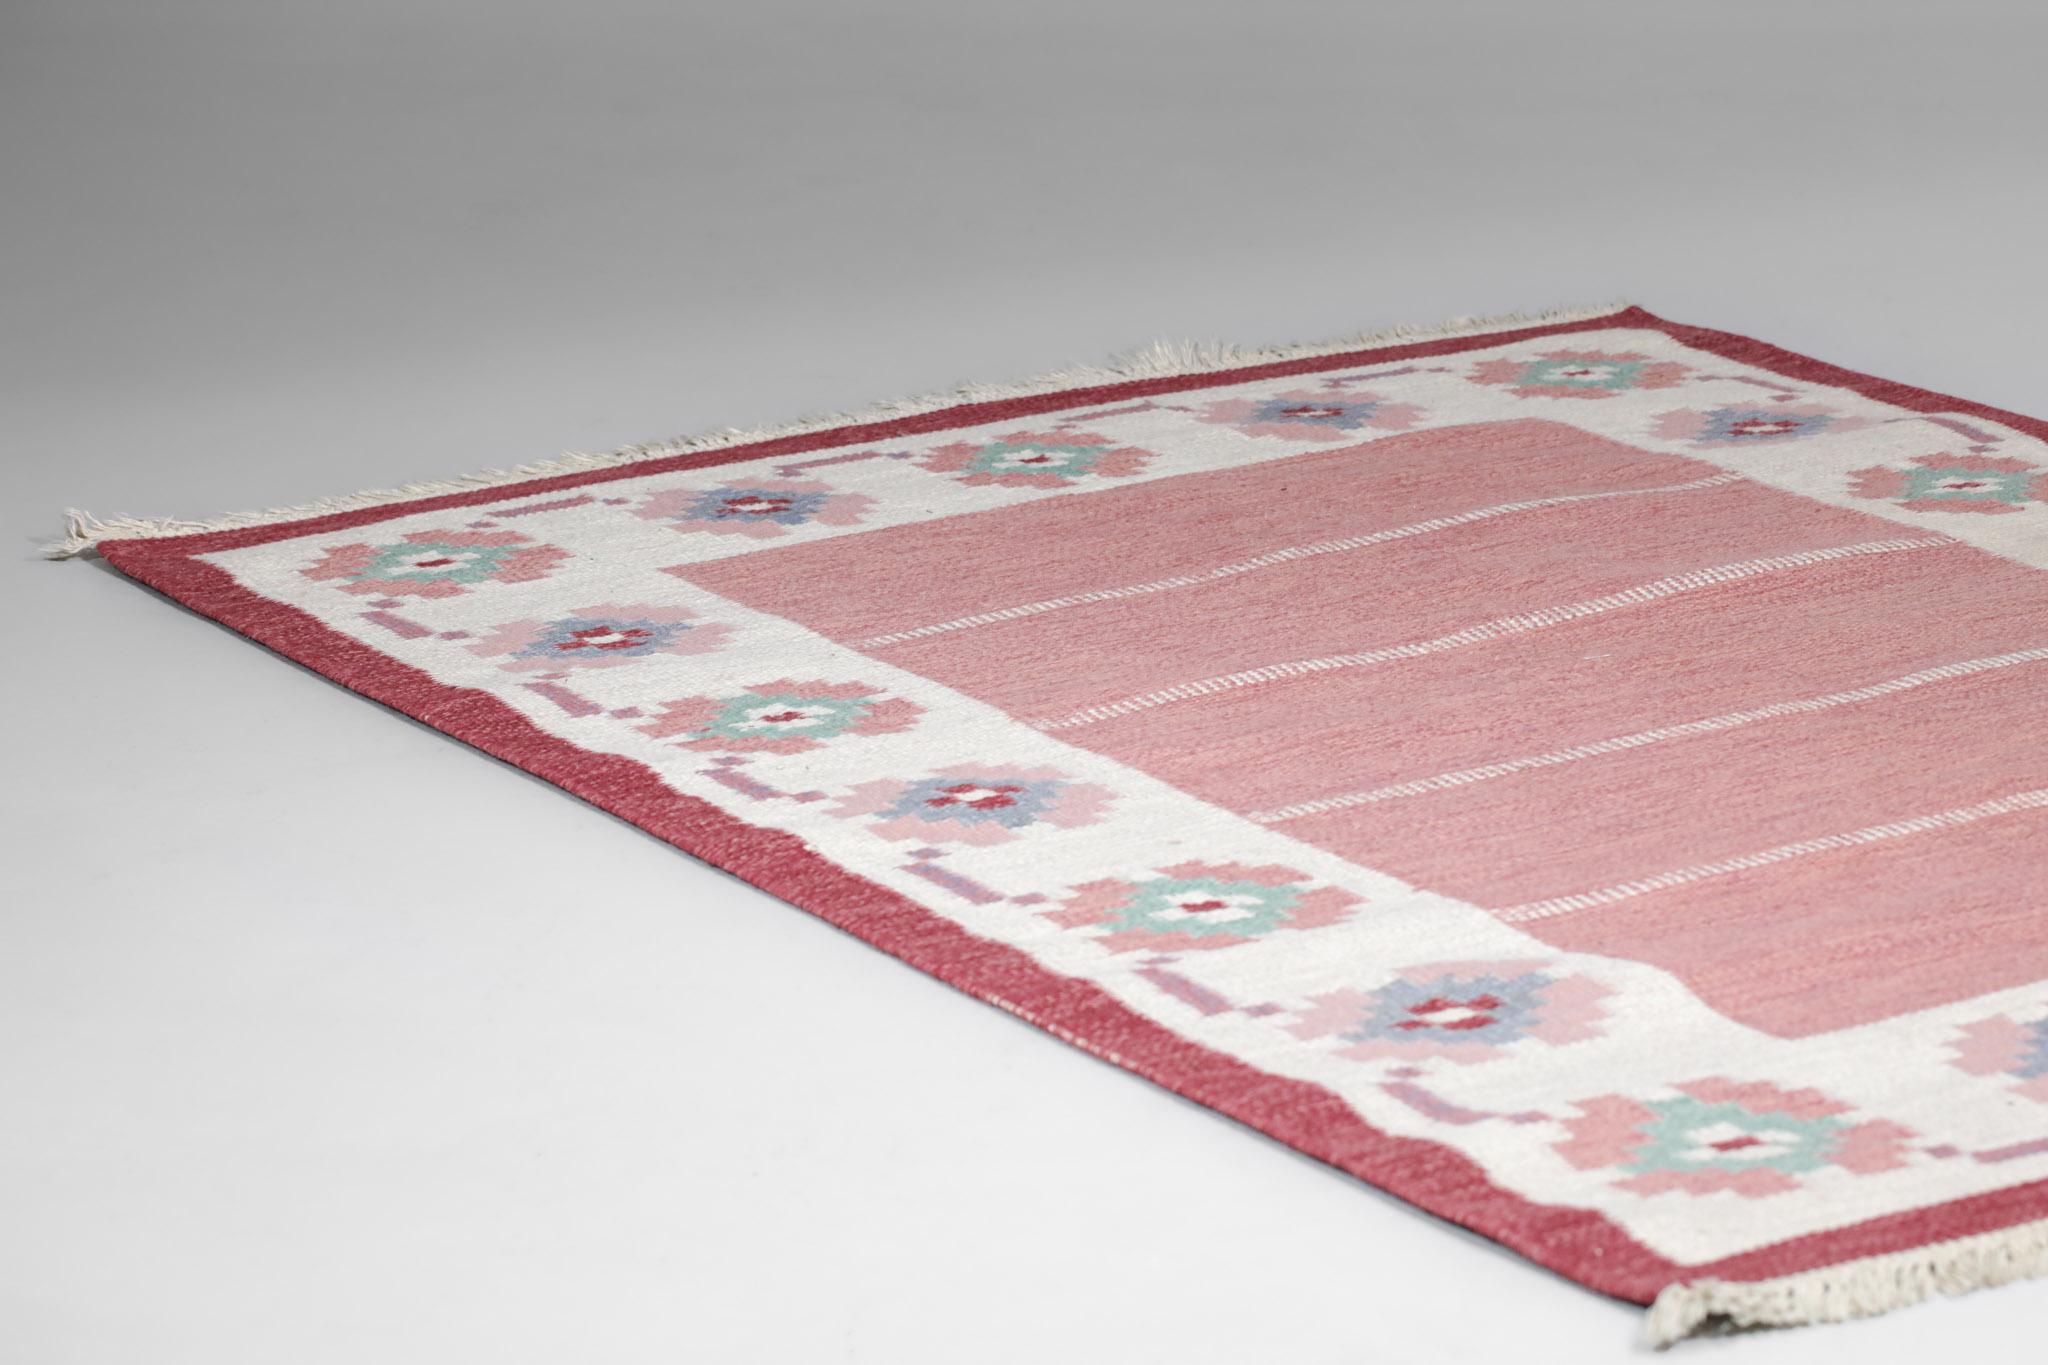 Very large scandinavian rug from the 60s. Flat weaving technique (rillakan), wool on linen. Traditional geometrical patterns in pink, white and blue colours. Handwoven in Sweden in the 50s and 60s. Excellent vintage condition (see photos).